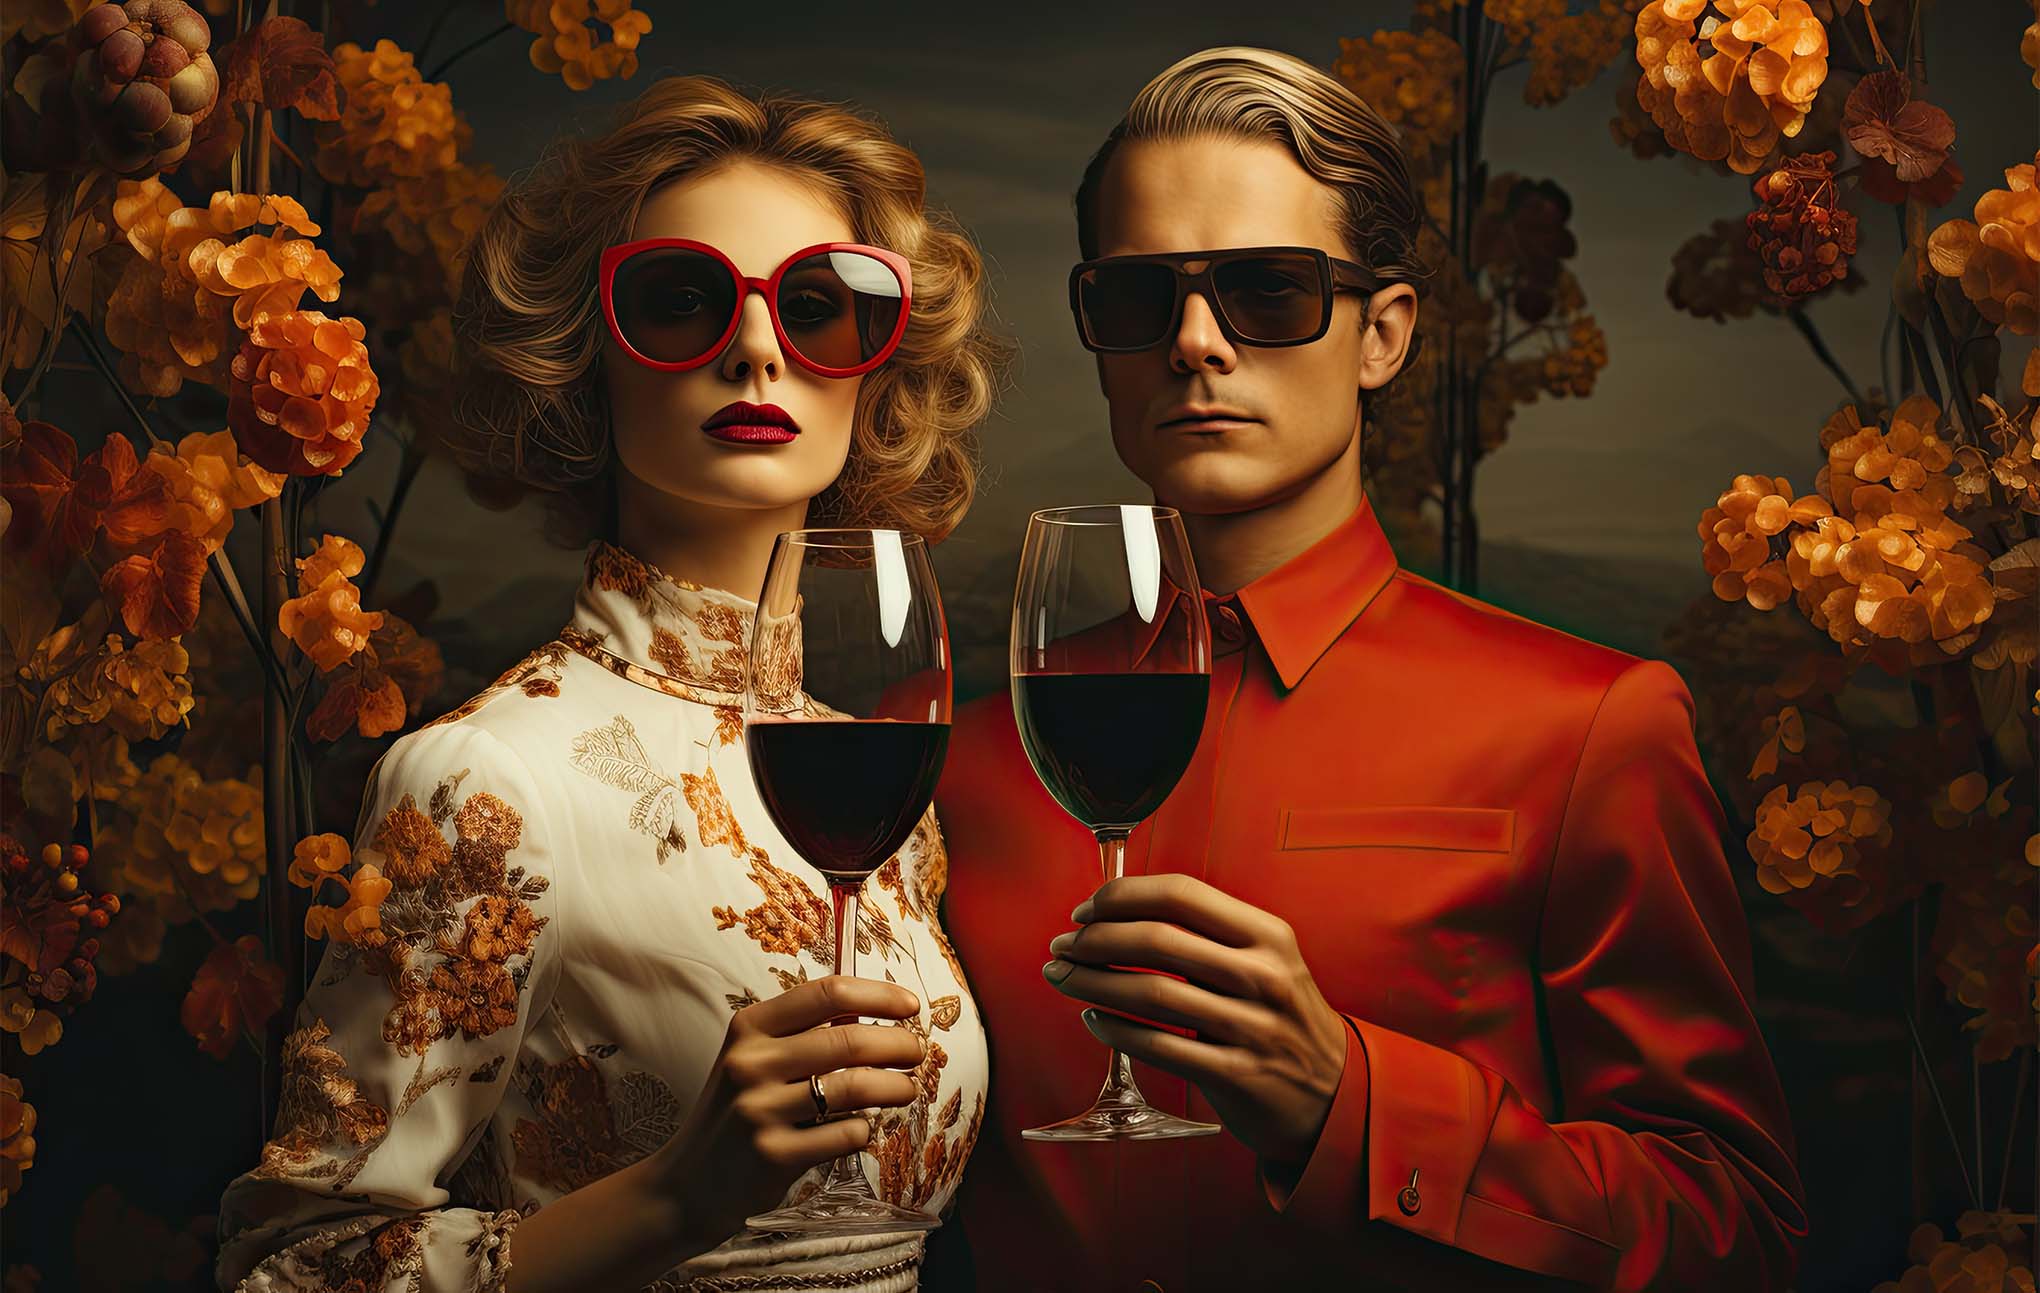 AI Generated image of extremely stylish woman in white floral dress and mad in red suit. They are drinking wine amidst field of flowers, suggesting importance of Customer Persona Development Services